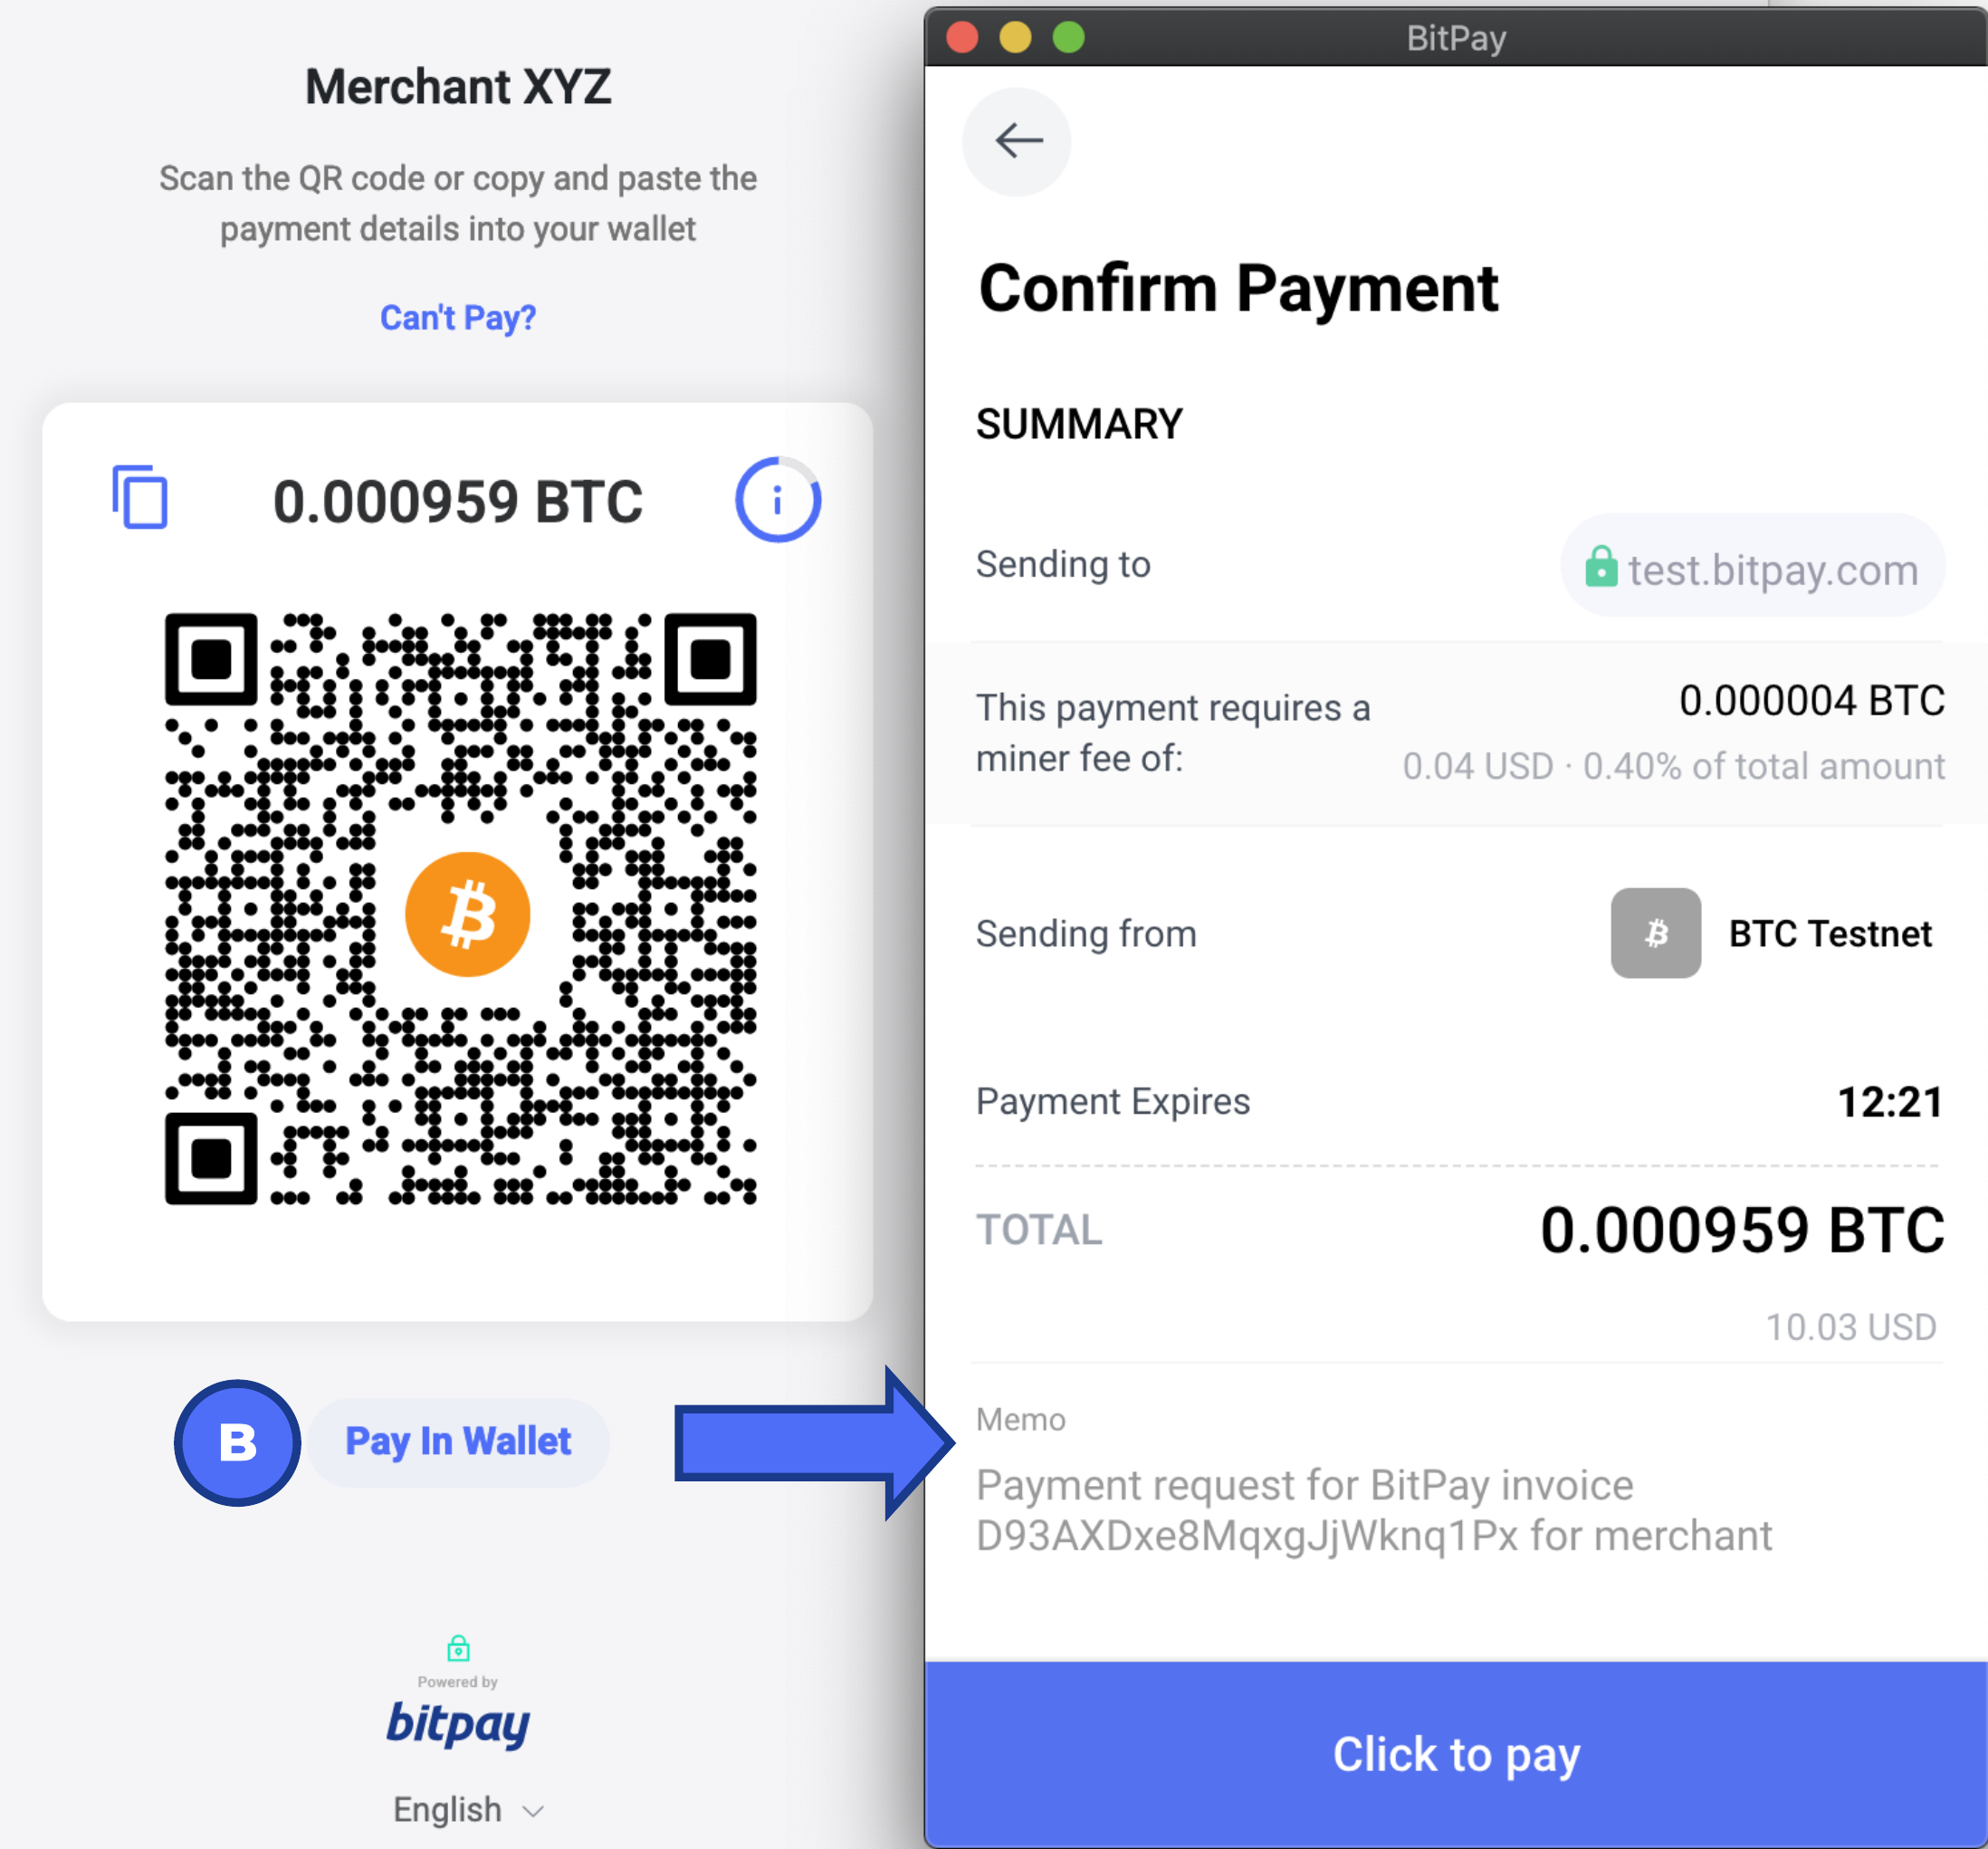 can you digitally pay in btc on bitpay